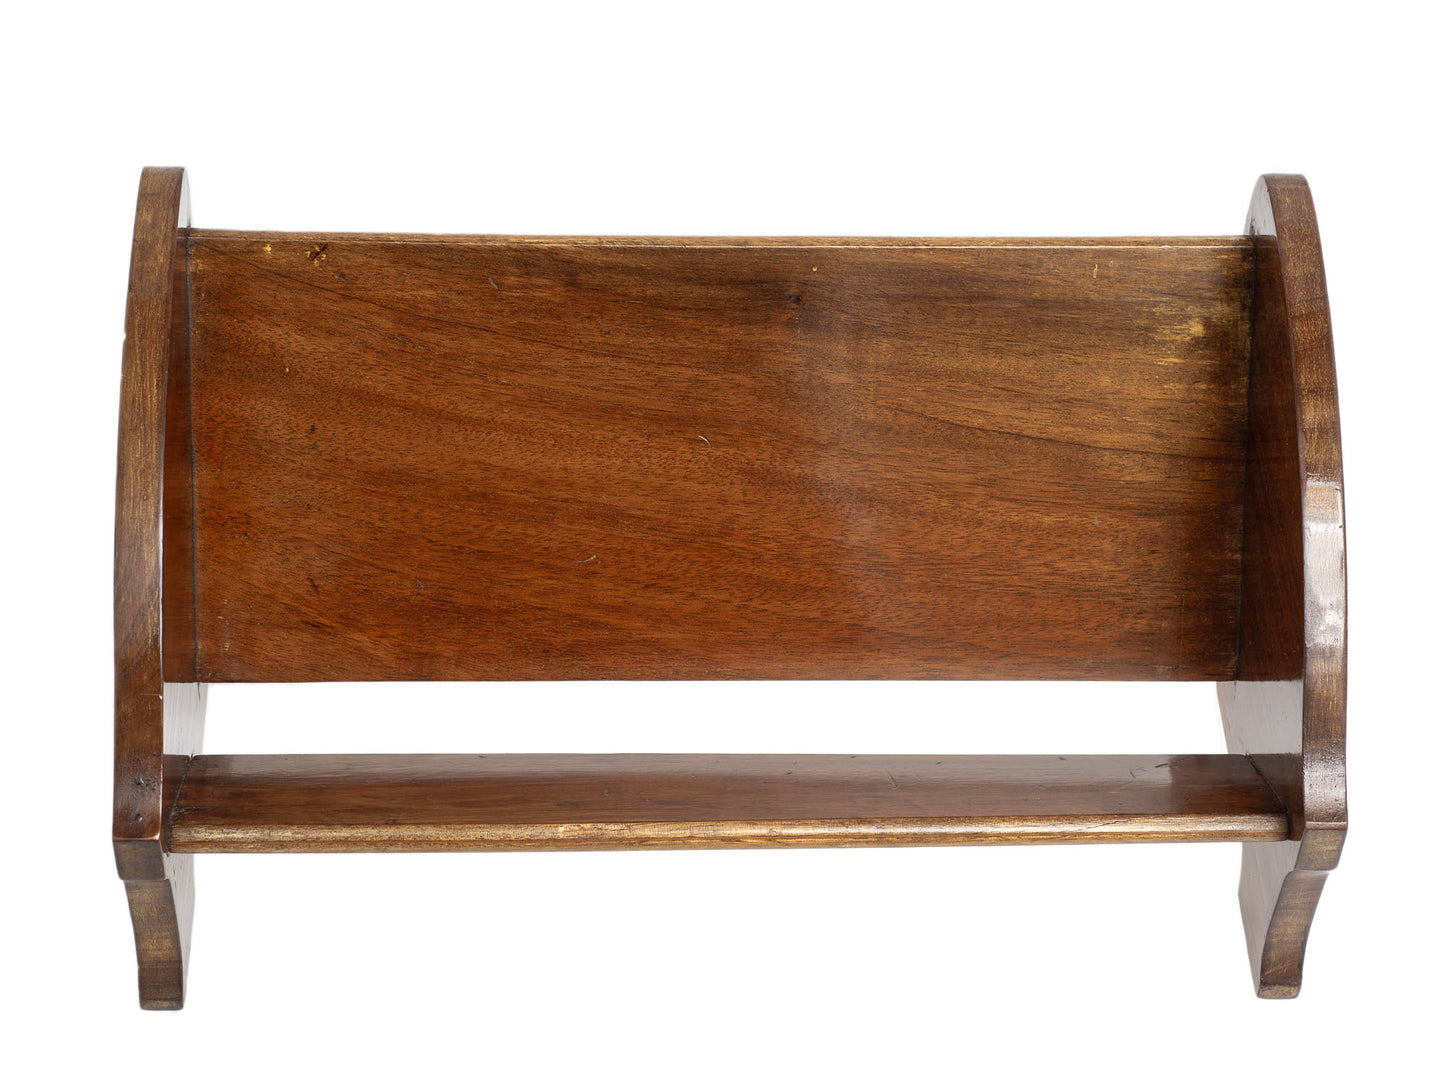 Antique Edwardian Mahogany Wood Portable Book Trough with Strung Detail c1905 (2918)